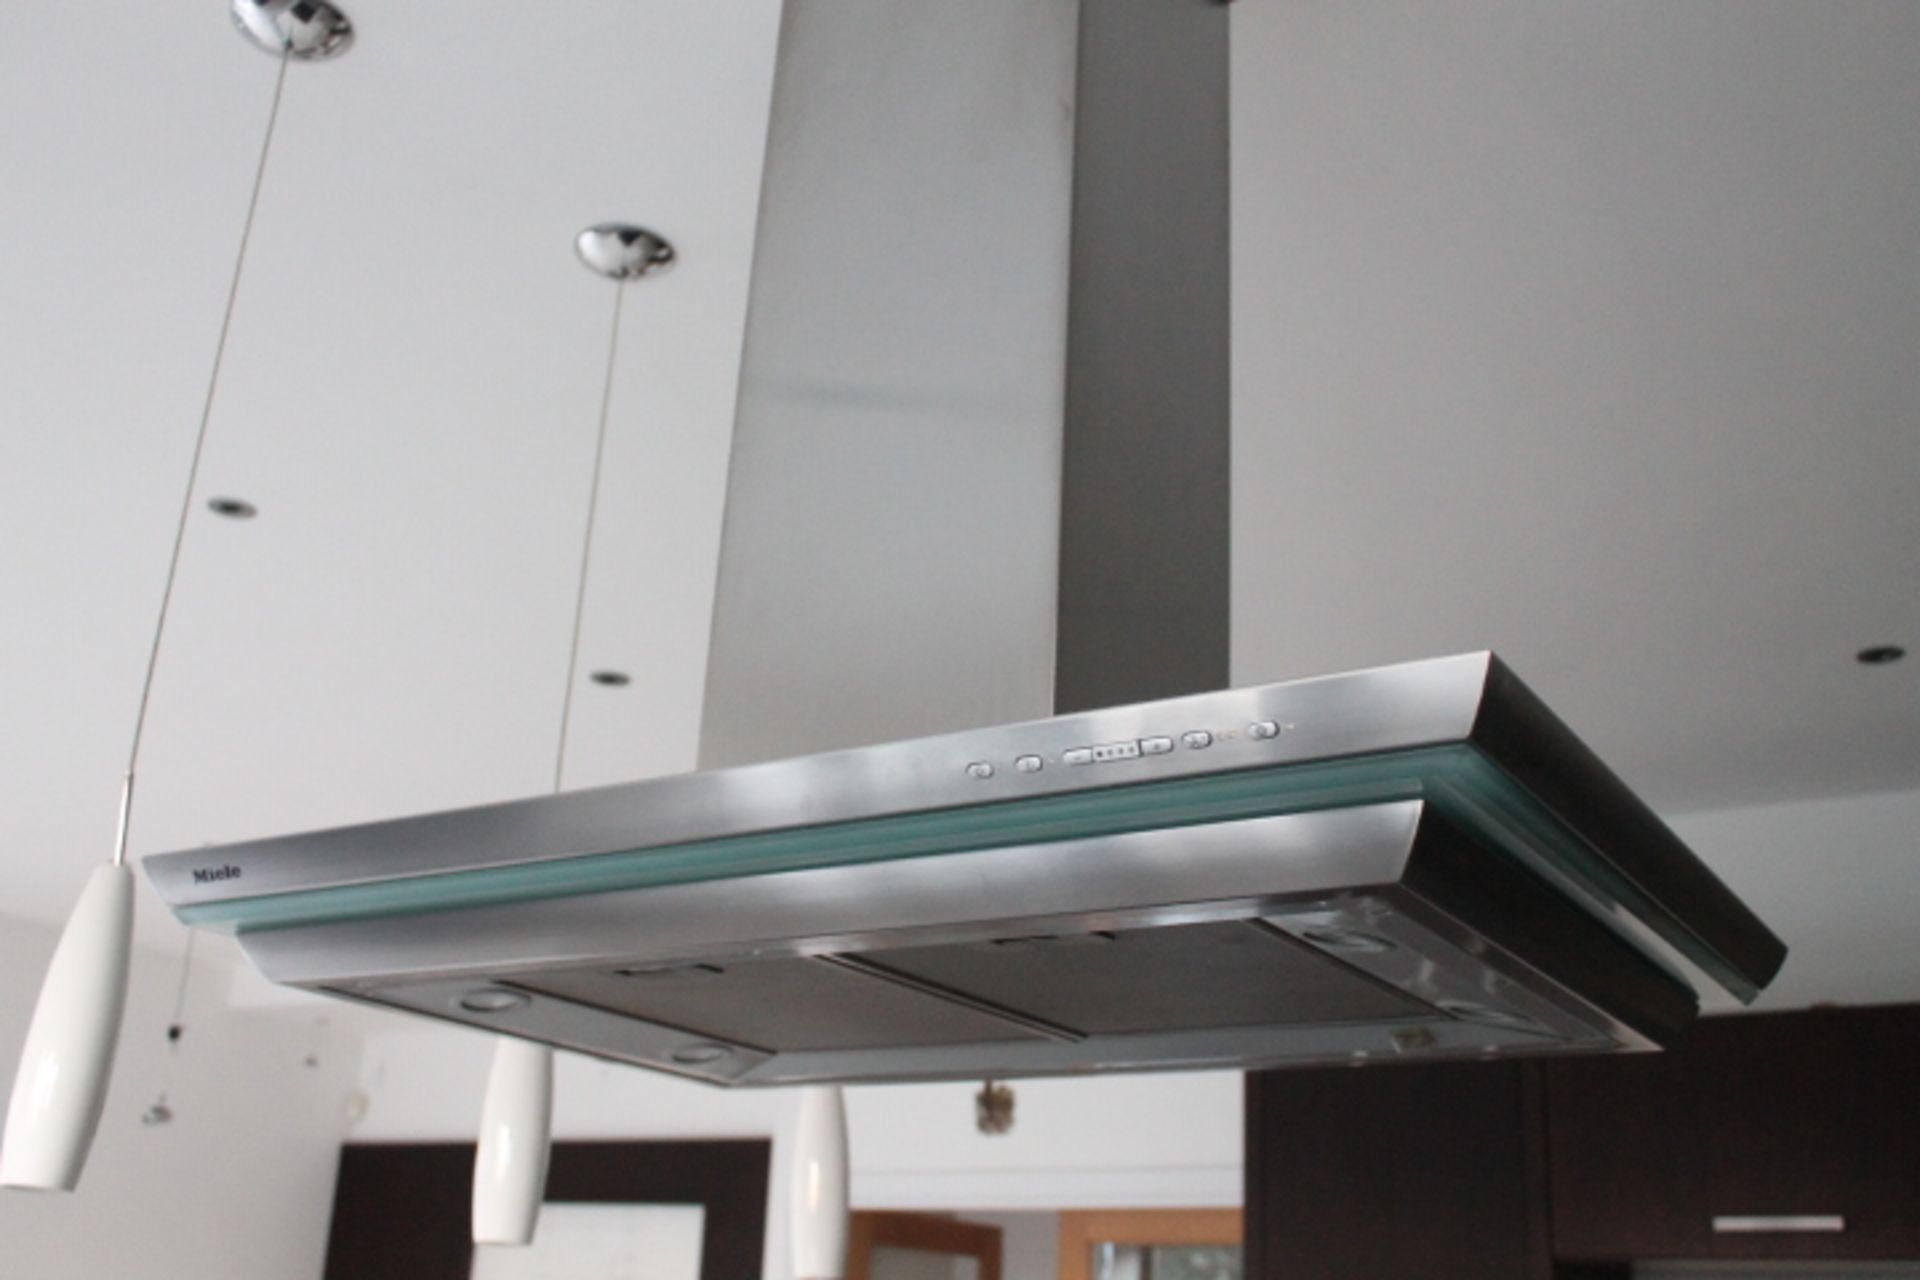 Grade U Twin Miele Built-in Electric Ovens And Miele 5-Burner Hob Plus Miele Overhead Stainless - Image 5 of 5